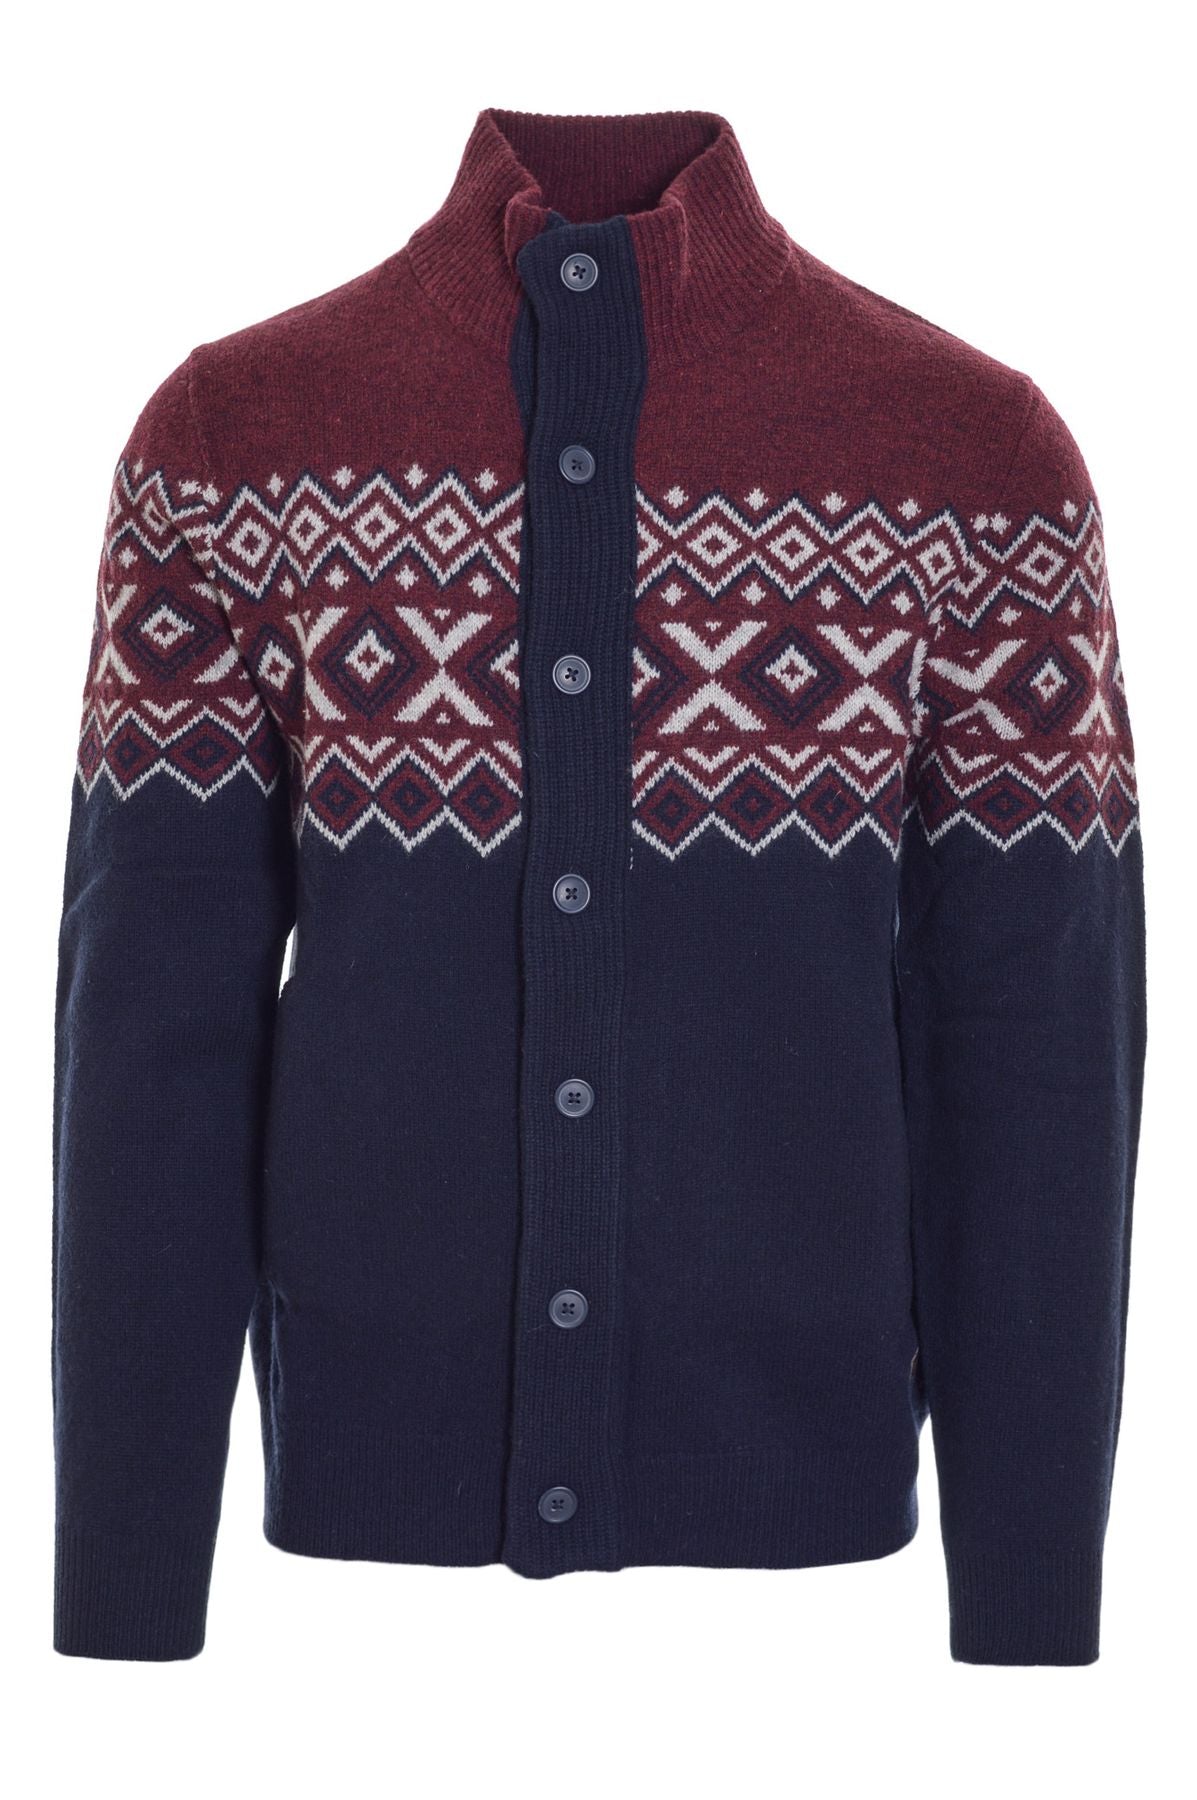 BARBOUR Cardigan Autunno/Inverno mkn1273re94